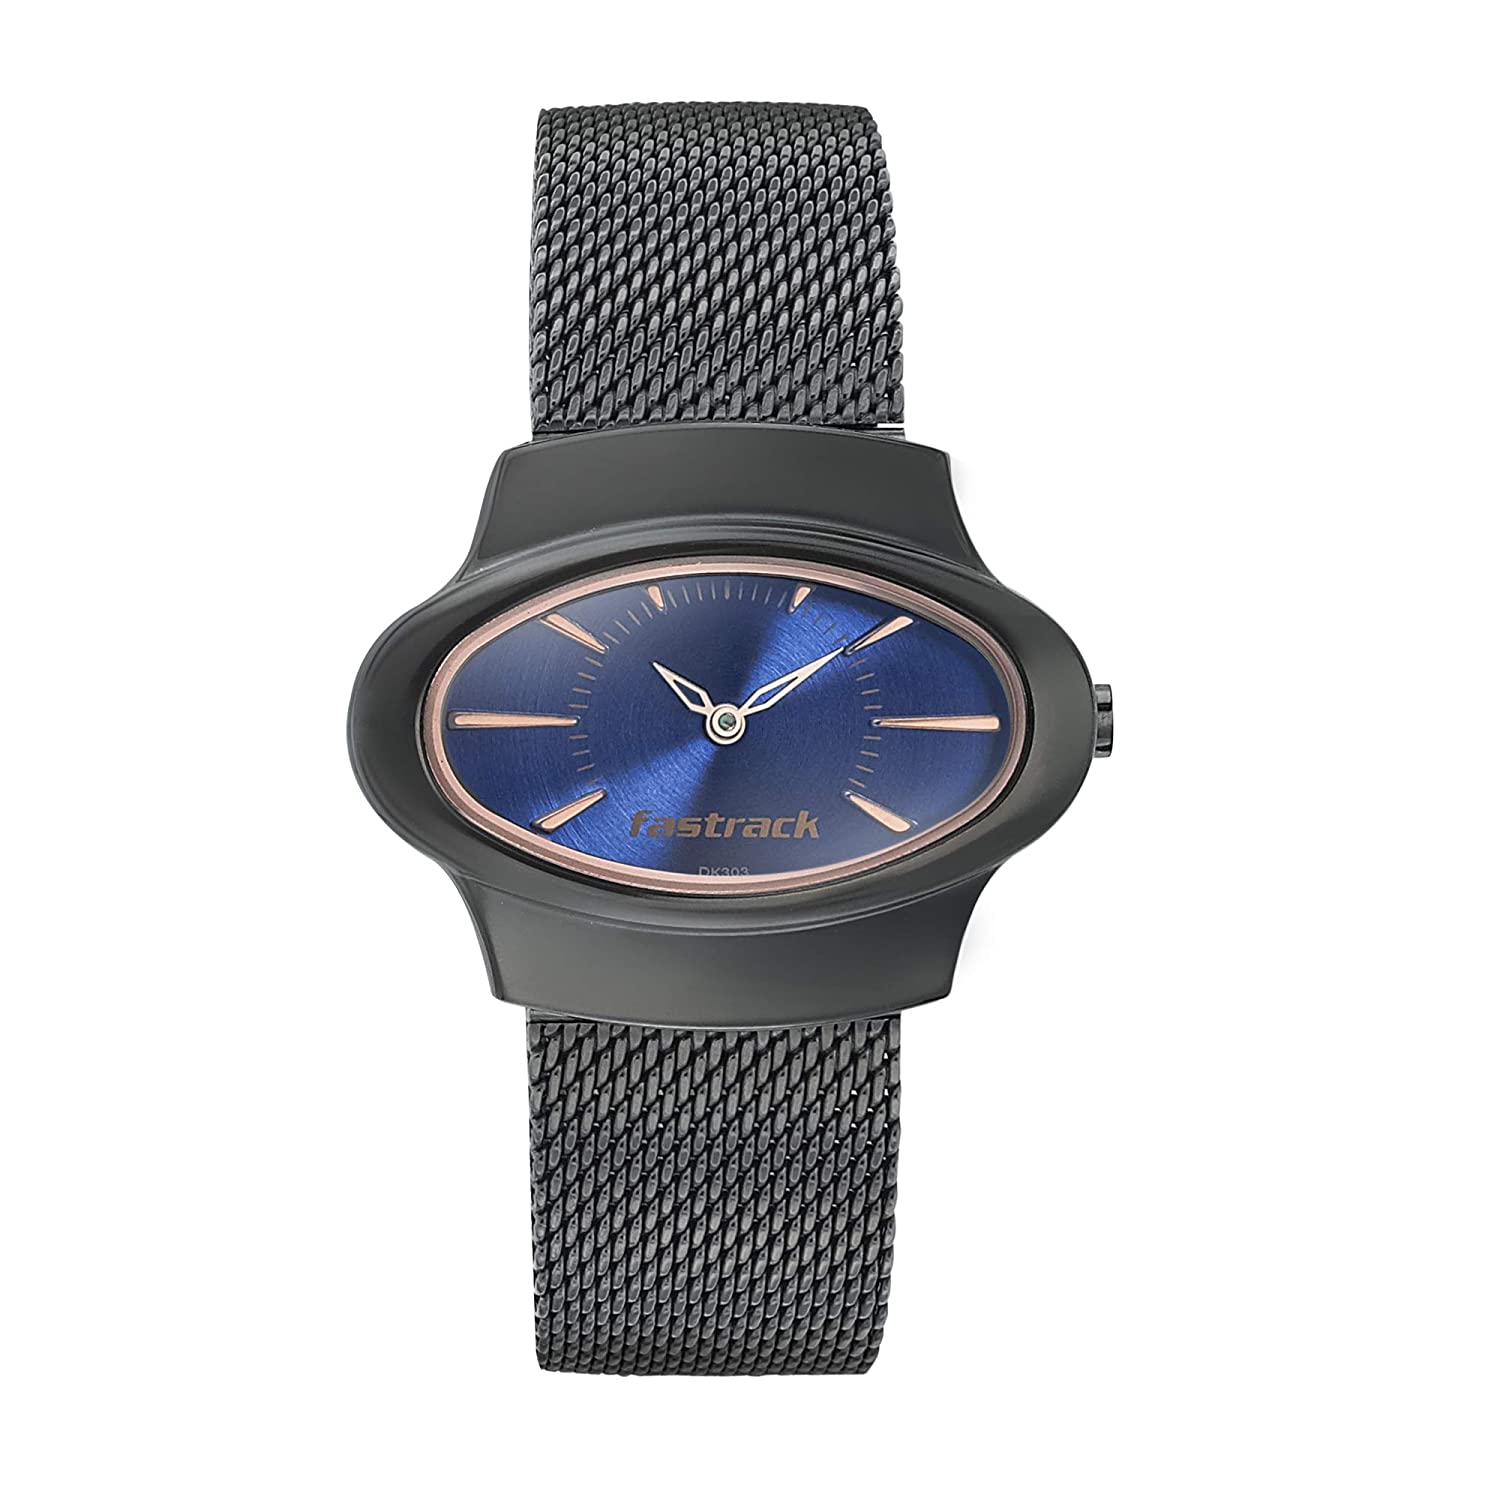 Fastrack Analog Blue Dial Women's Watch